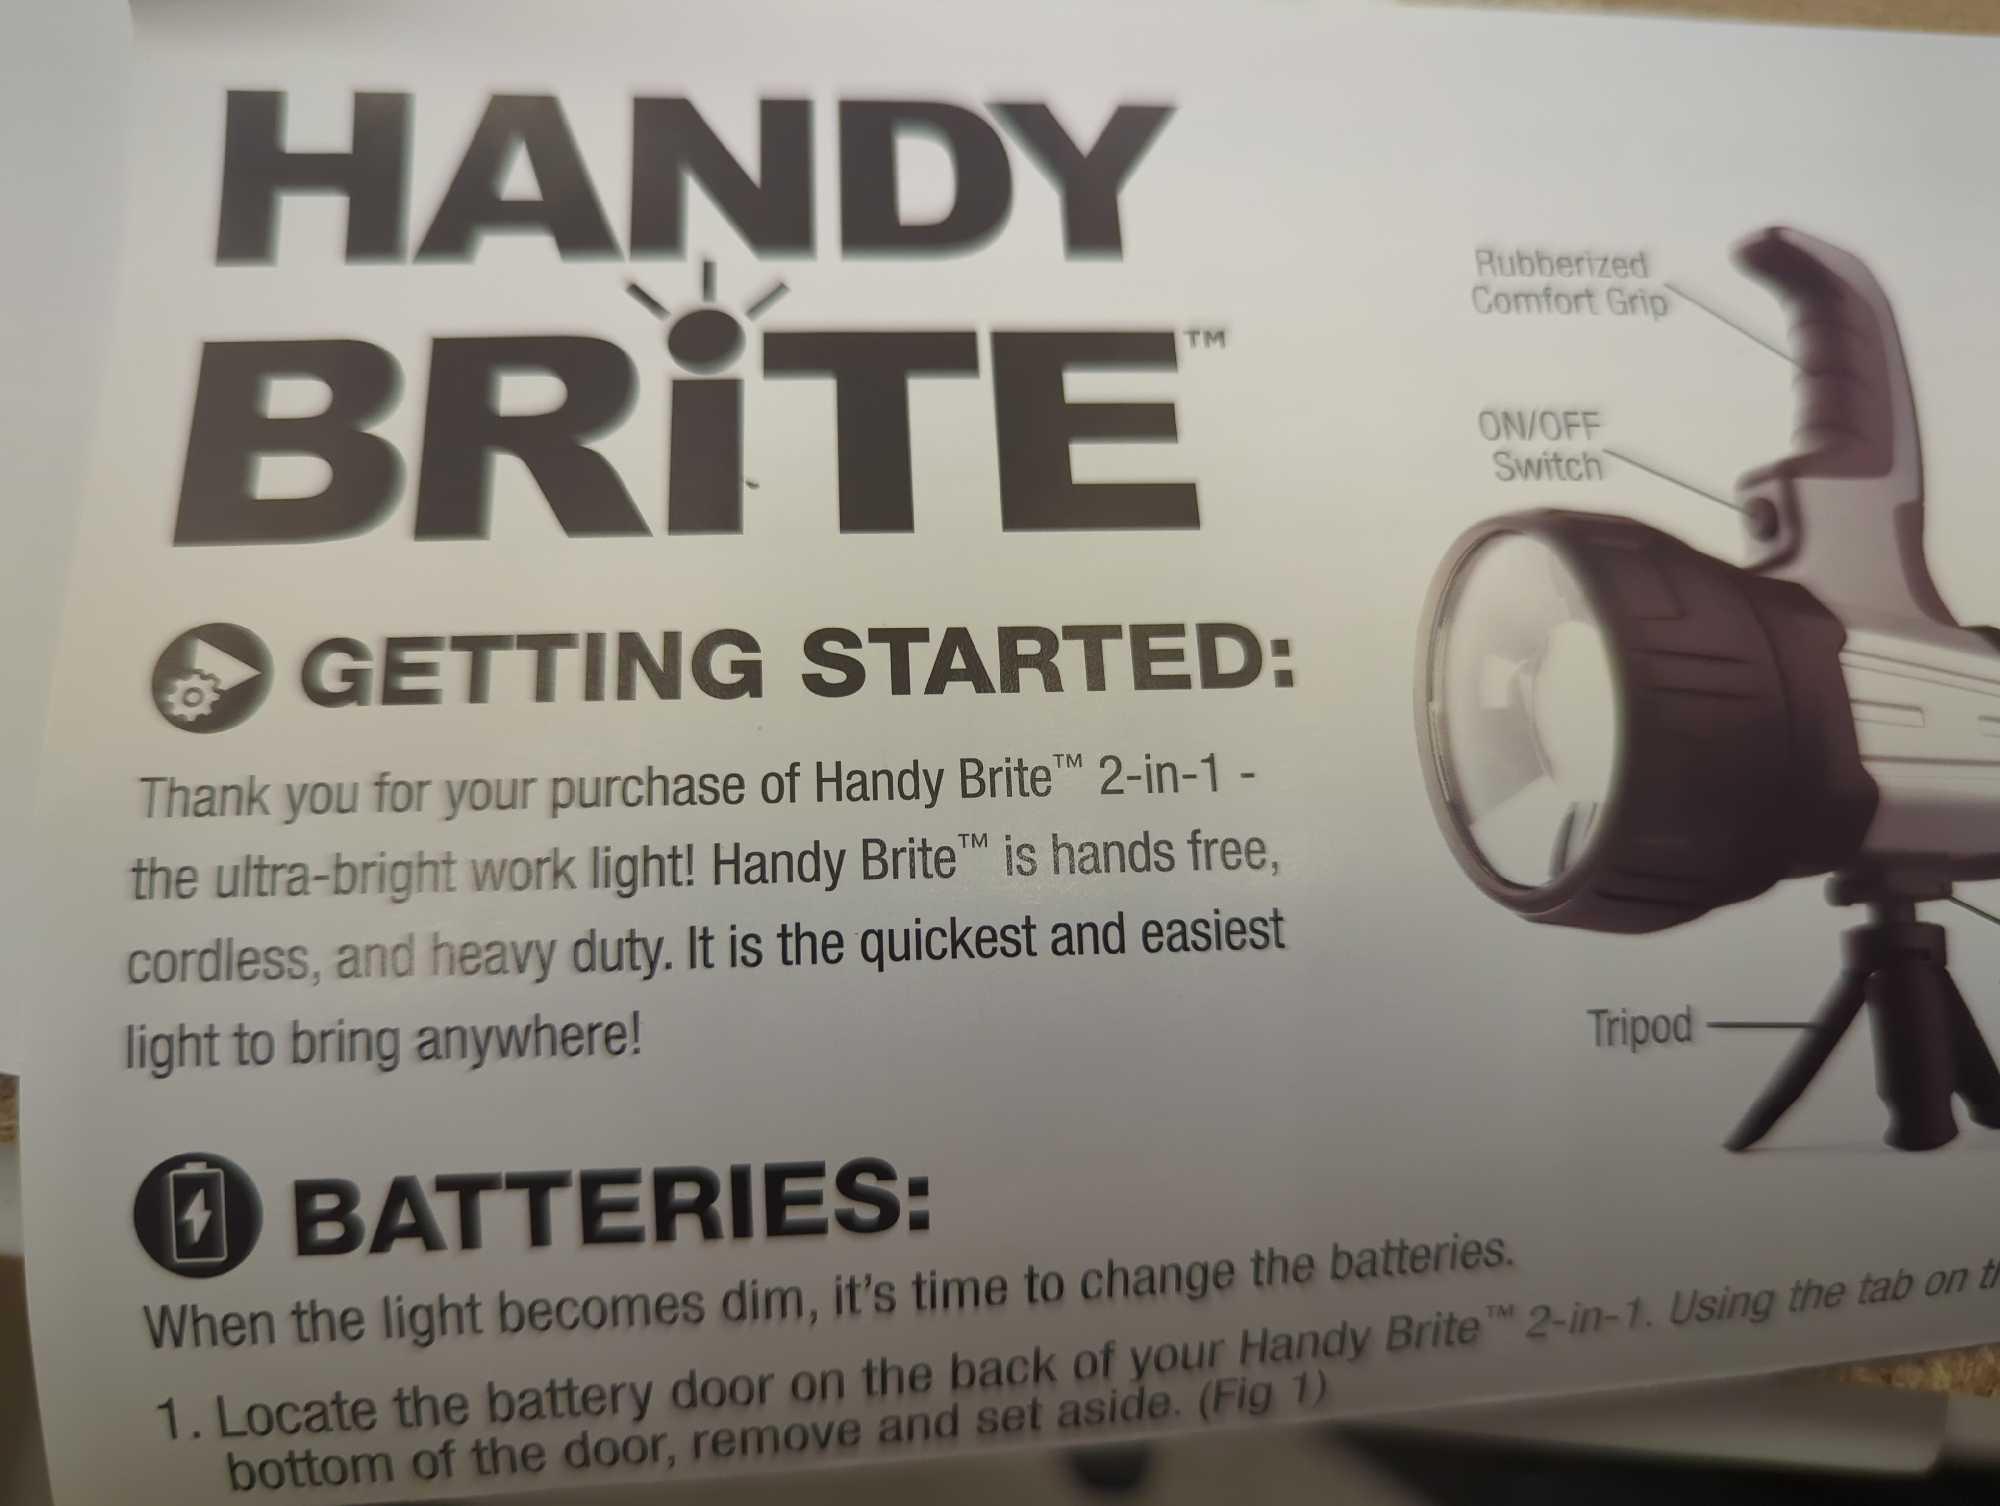 HANDY BRITE Ultra-Bright LED Cordless 2-in-1 Tripod Work Light, Retail Price $22, Appears to be New,